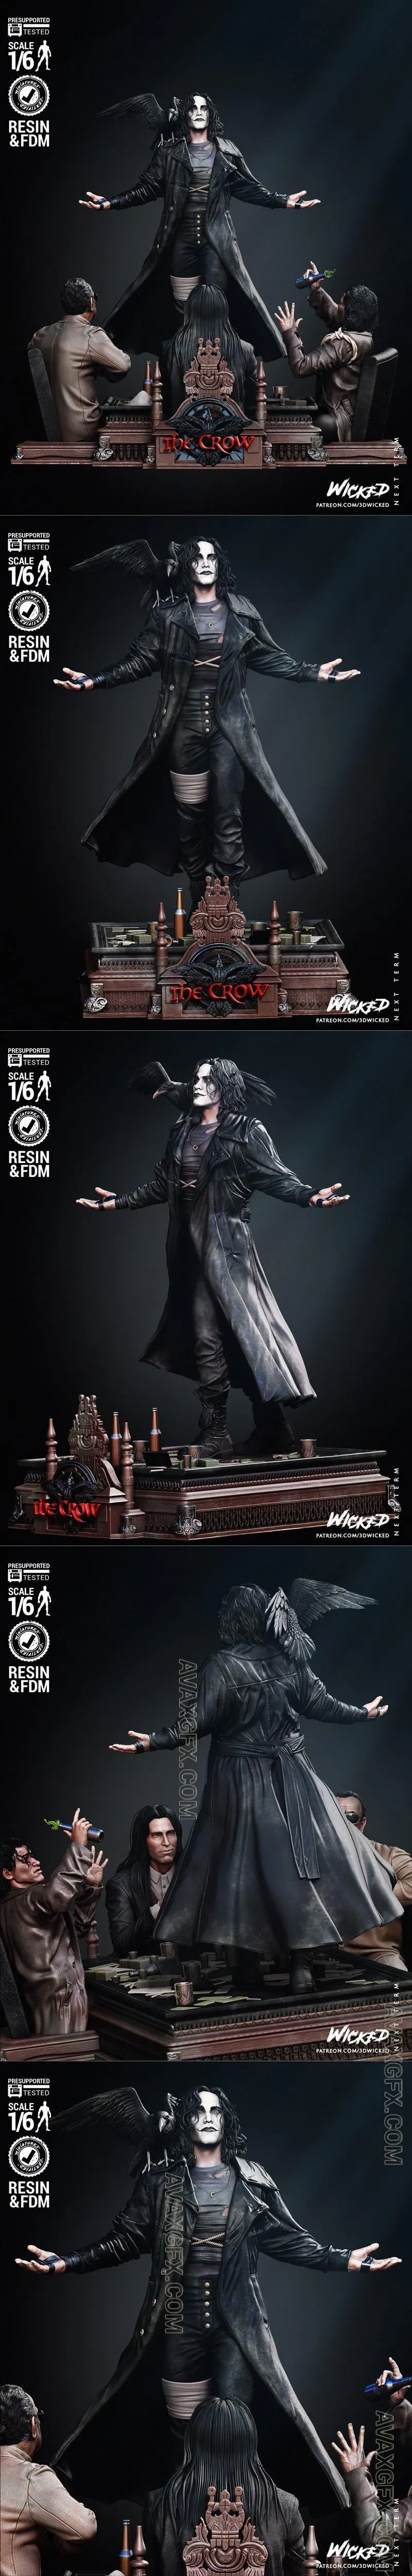 WICKED - The Crow Diorama - STL 3D Model